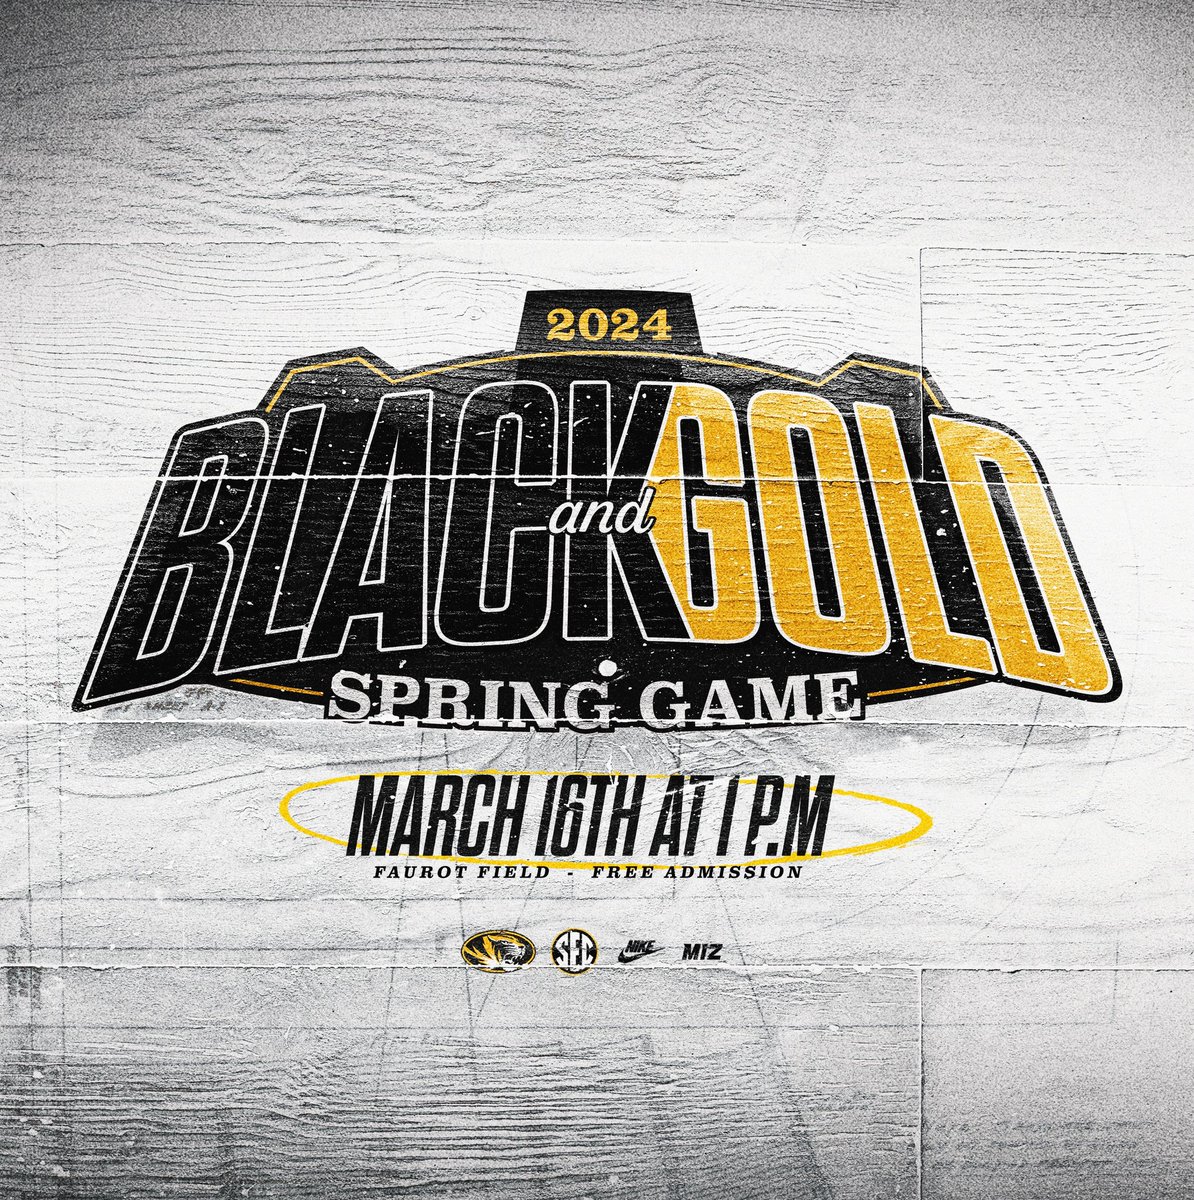 𝑭𝒓𝒊𝒆𝒏𝒅𝒍𝒚 𝒓𝒆𝒎𝒊𝒏𝒅𝒆𝒓. The 2024 Black and Gold Spring Game is 12 days away. 1:00 pm @ Faurot Field • Free admission #MIZ 🐯🏈